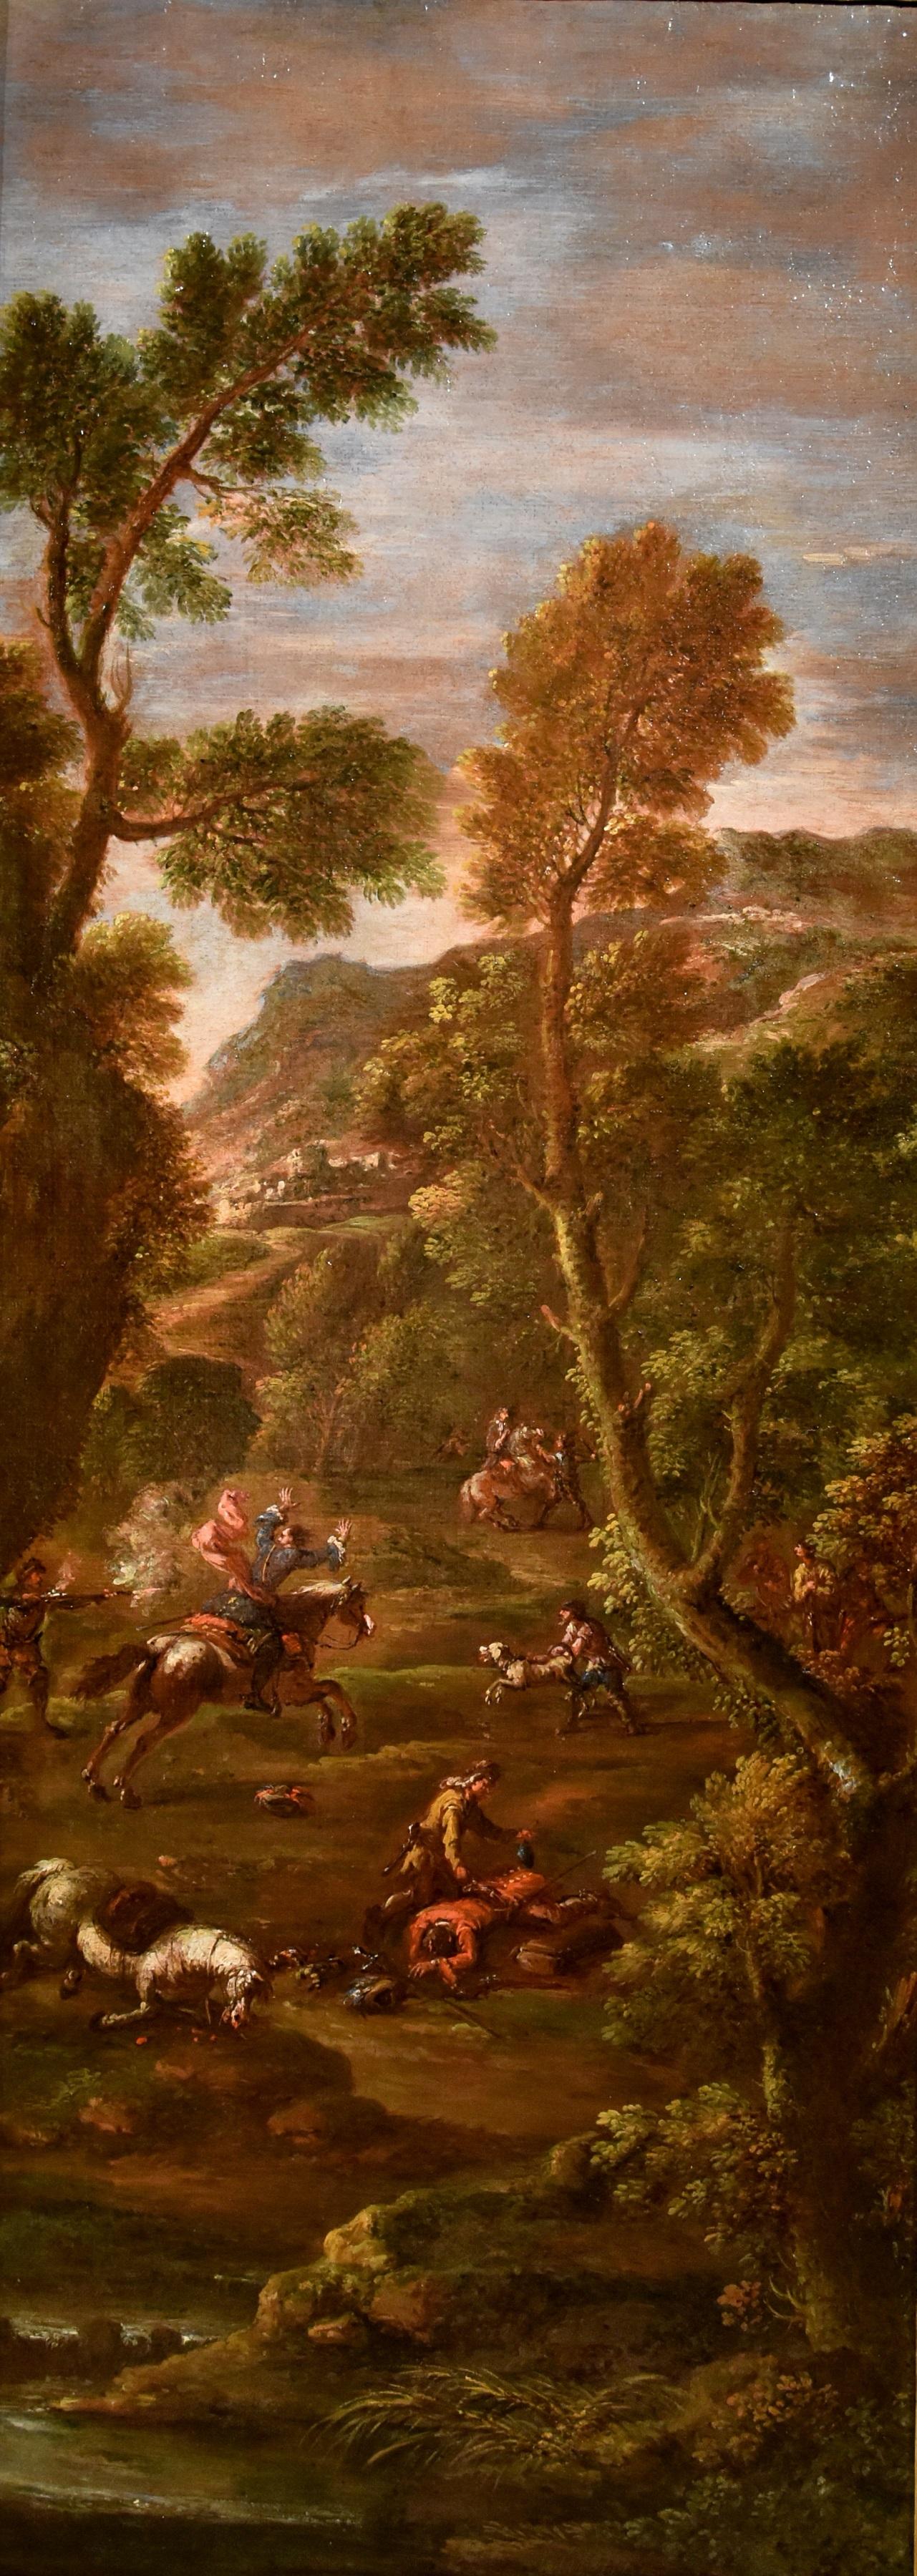 Zais Landscape Couple Paint Oil on canvas Old master 18th Century Italy Venice For Sale 2